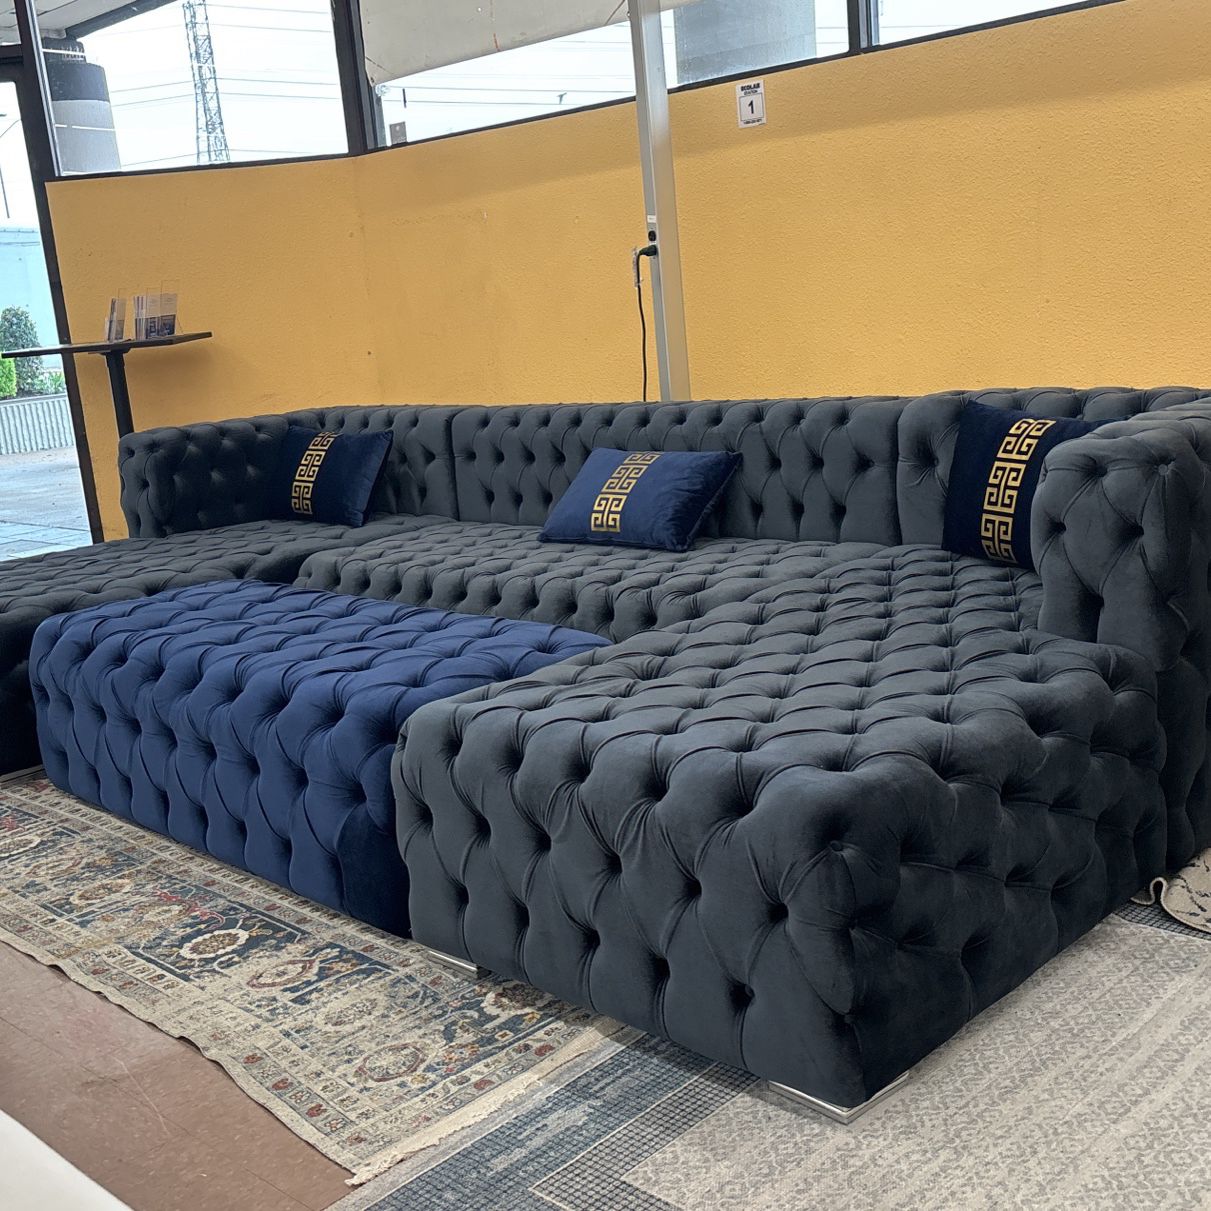 MEGA SALE 🫨🤠❤️ Modern Tufted U Shaped Sectional With Ottoman Pillows Included 😇 No Interest Finance Available ❤️😻